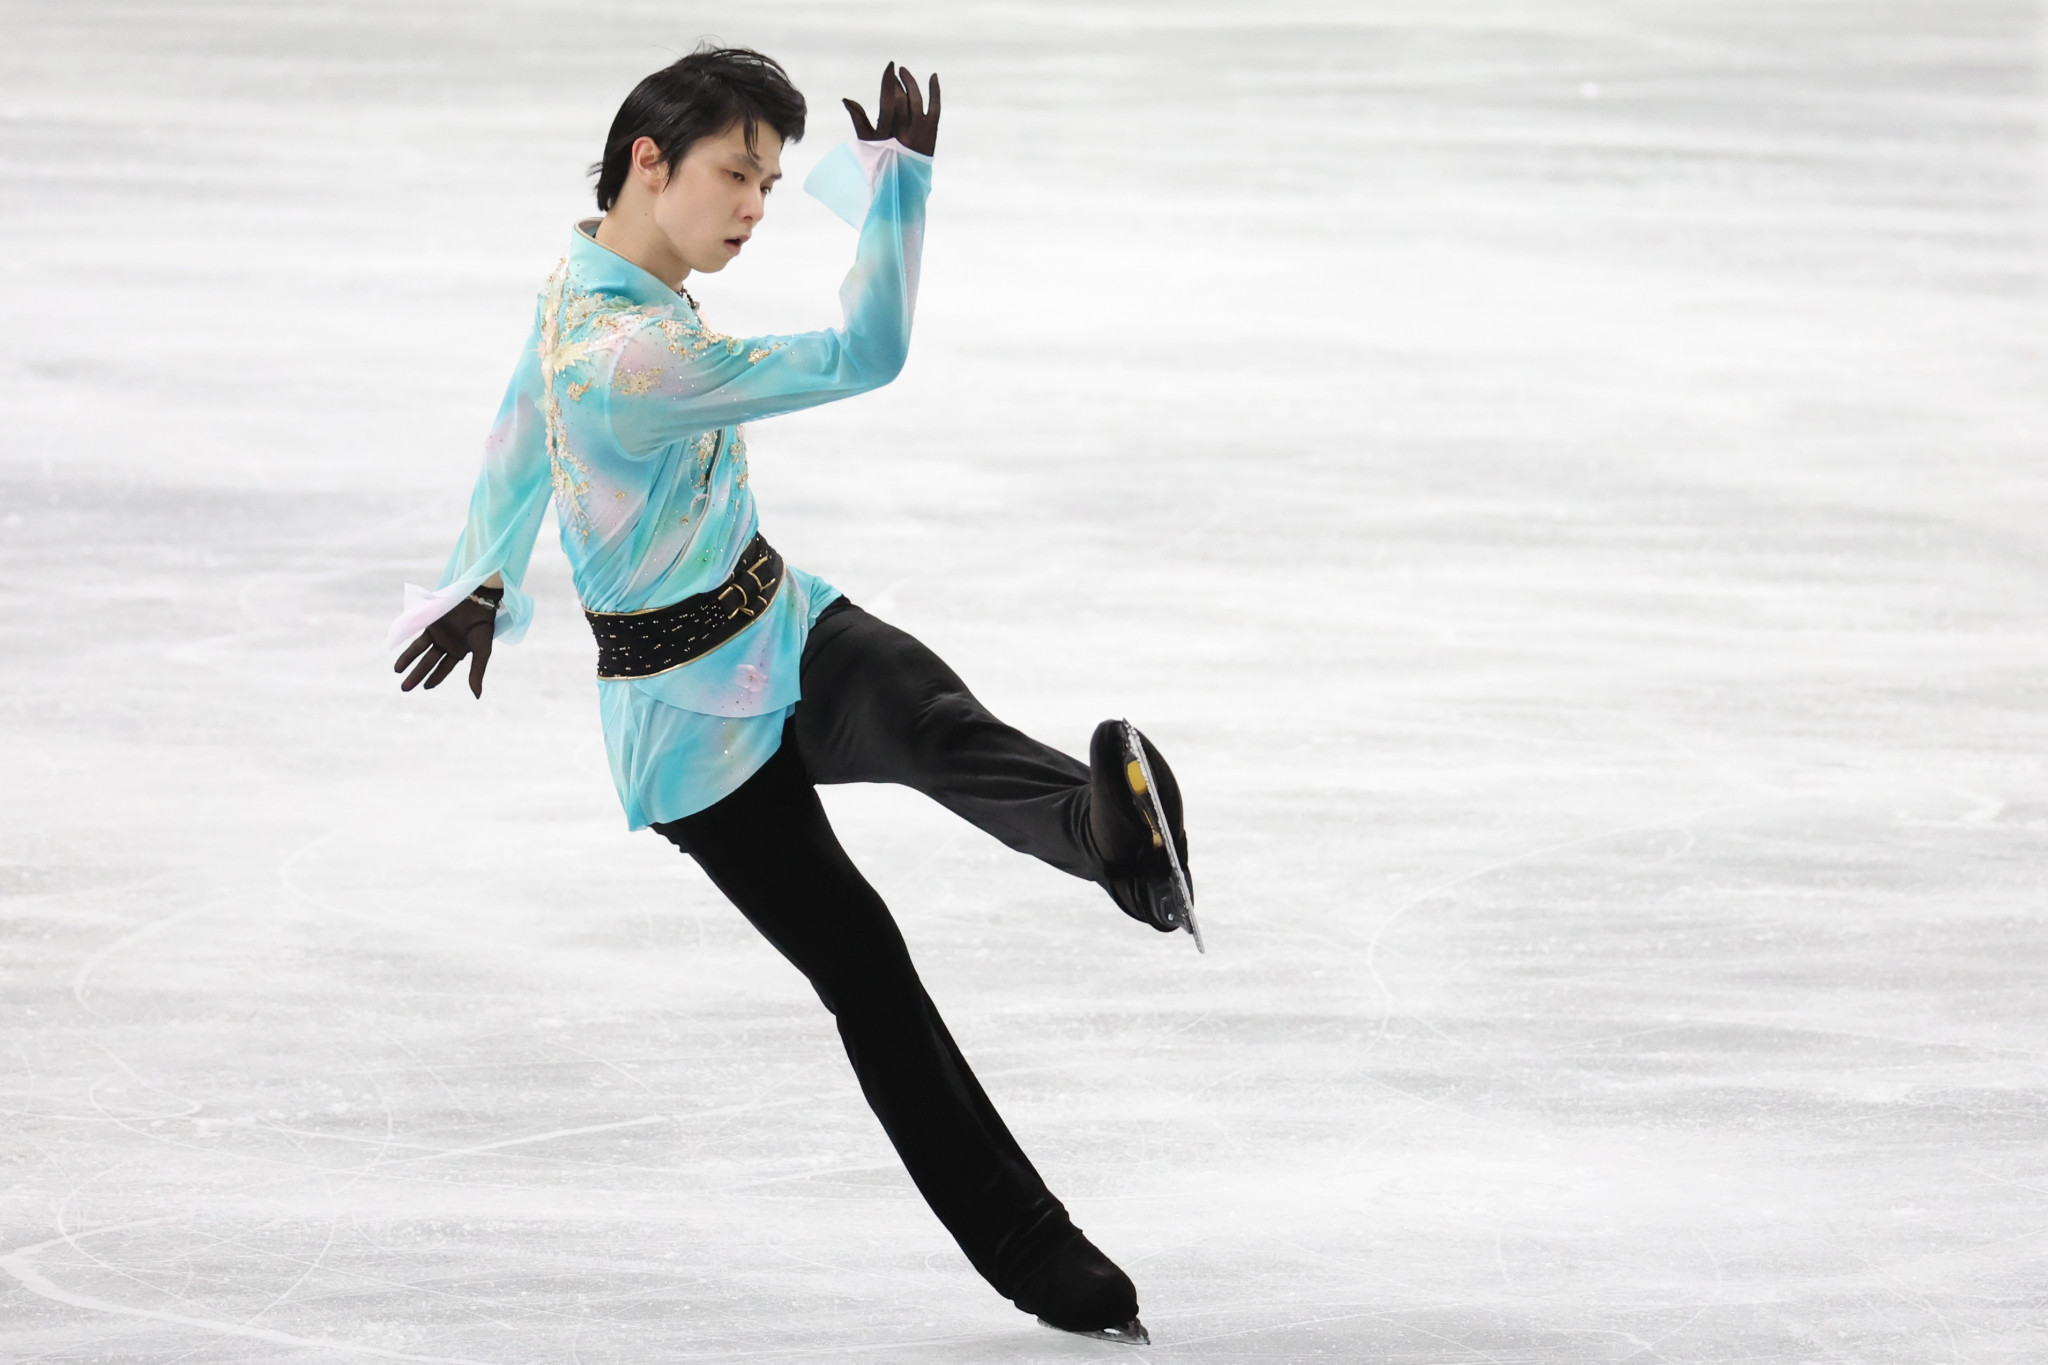 Japan's 2014 and 2018 Olympic men's figure skating champion Yuzuru Hanyu, who missed a medal at Beijing 2022, may miss next month's World Championships in Montpellier ©Getty Images